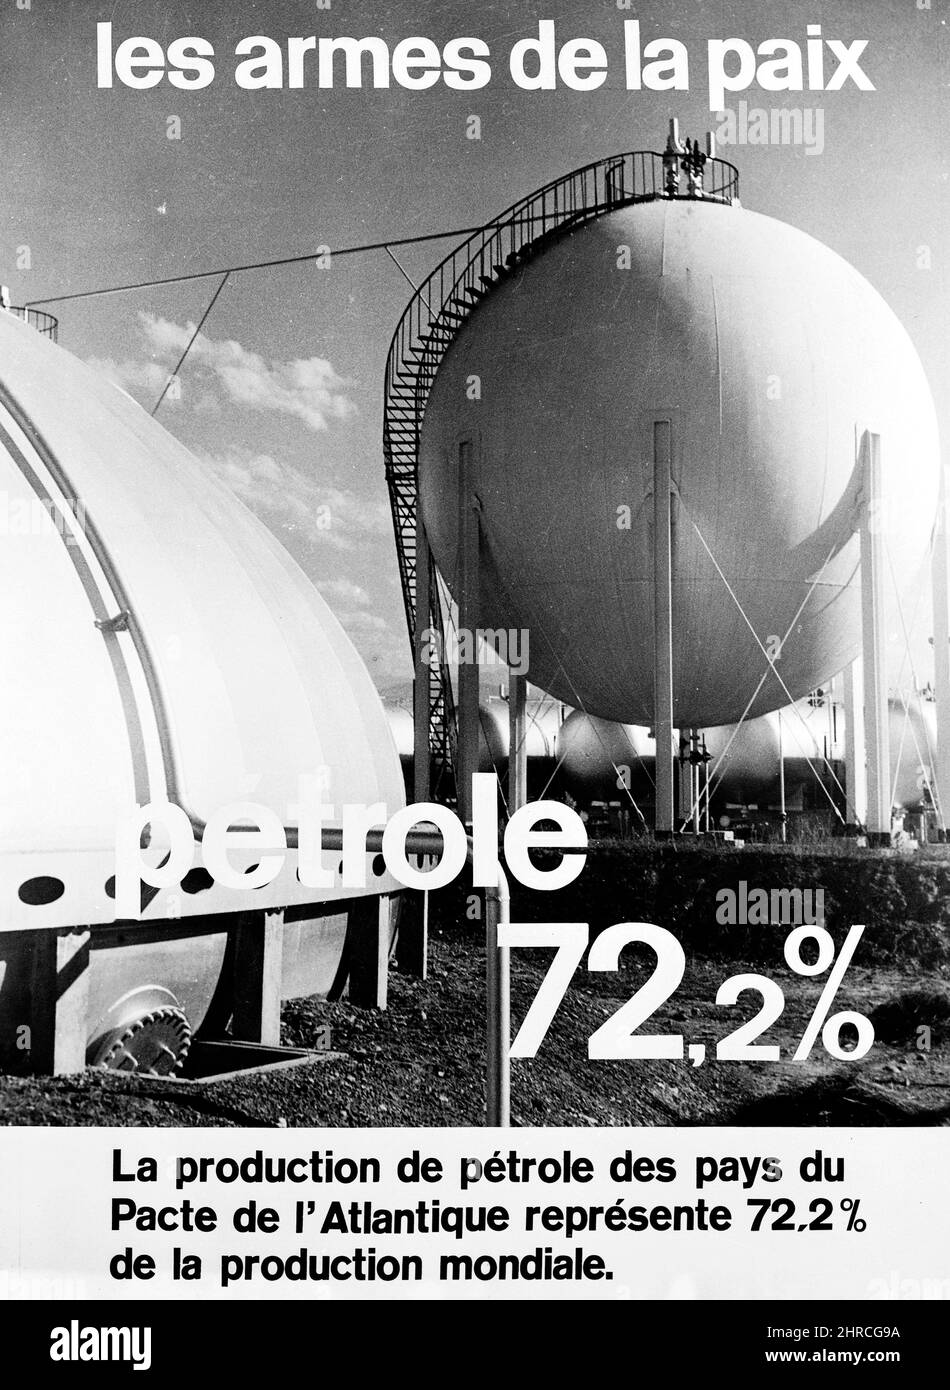 NATO (North Atlantic Treaty Organization) Poster (written in French) with photo of petroleum production. Caption in French states NATO nations produce 72.2% of the world's petroleum,' circa 1948. (Photo by Records of the Agency for International Development) Stock Photo